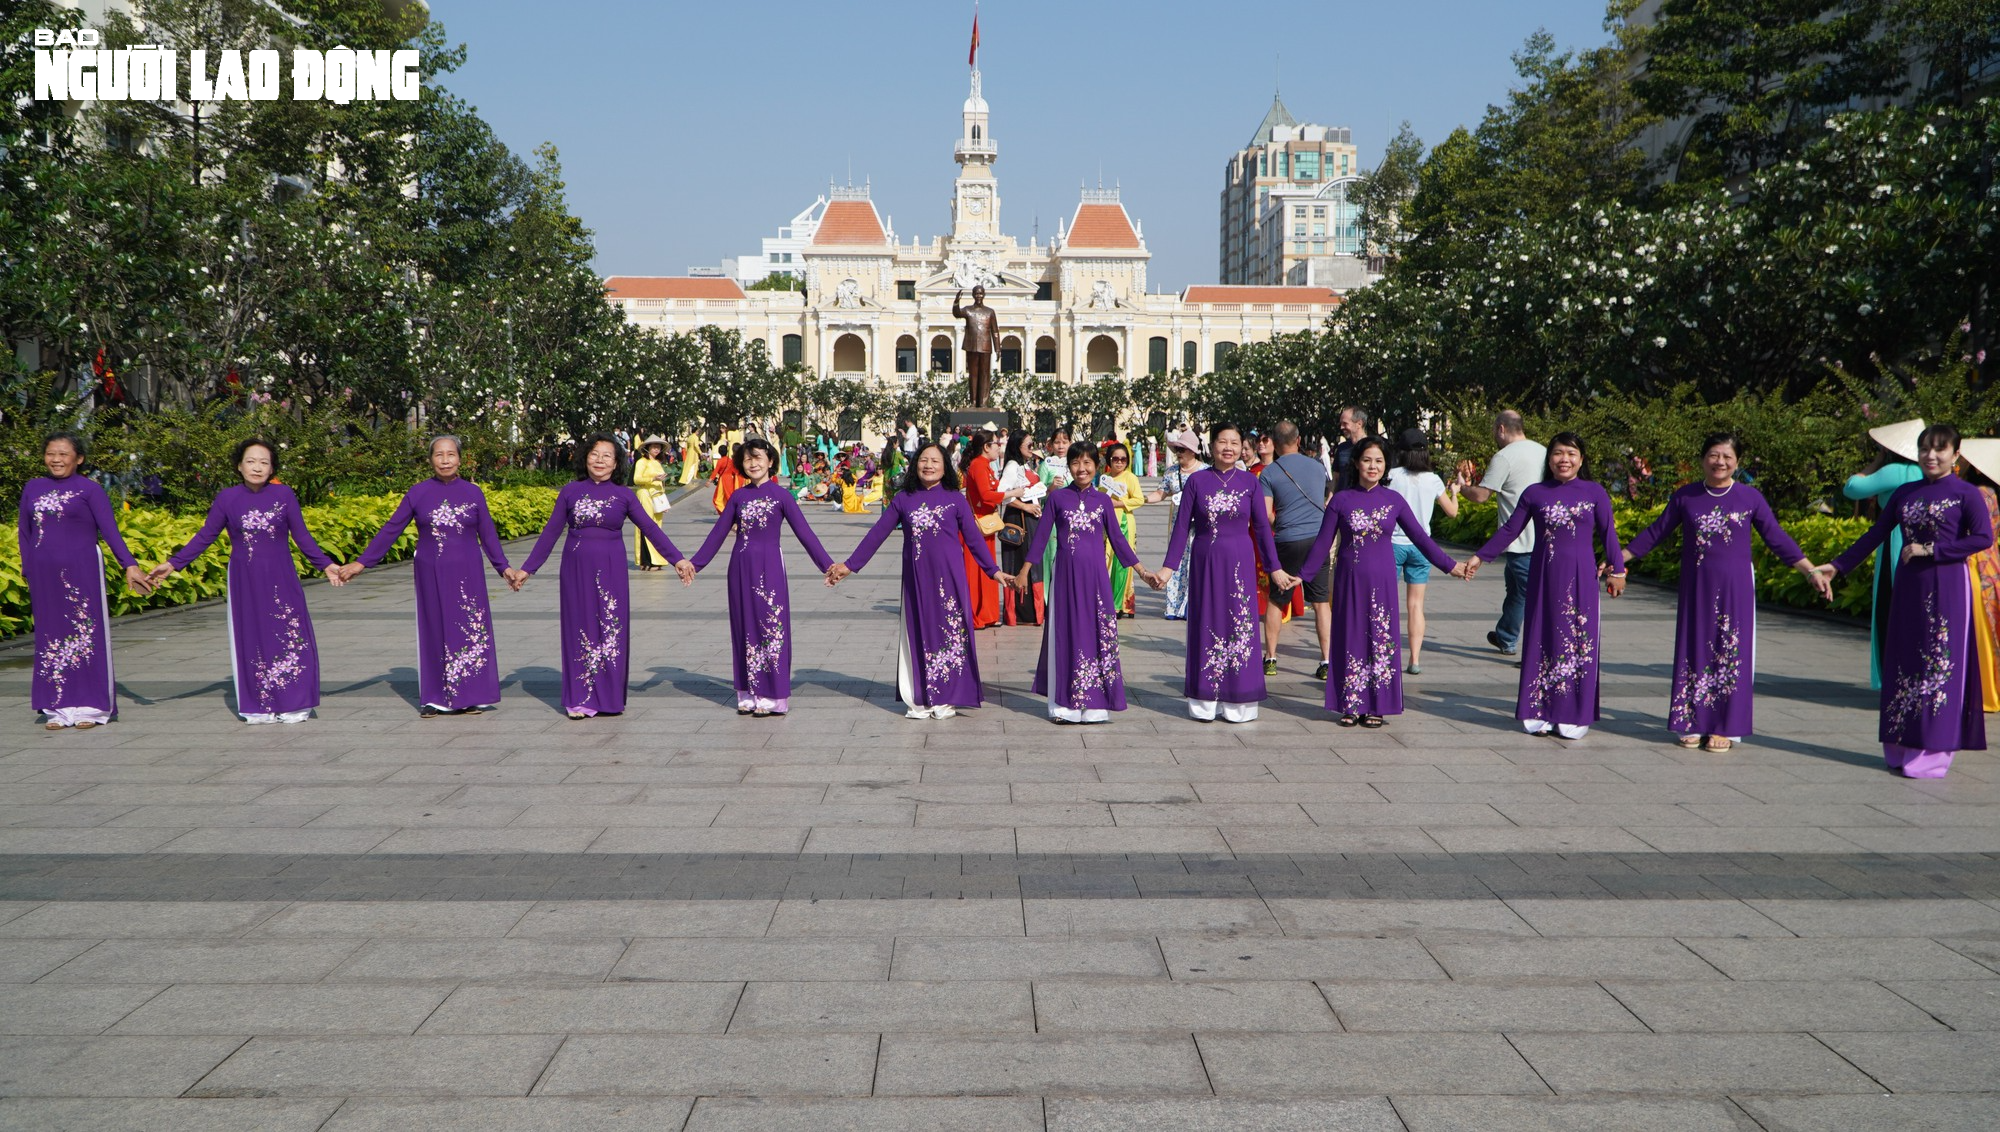 More than 3,000 people perform ao dai on the streets of Ho Chi Minh City - Photo 11.